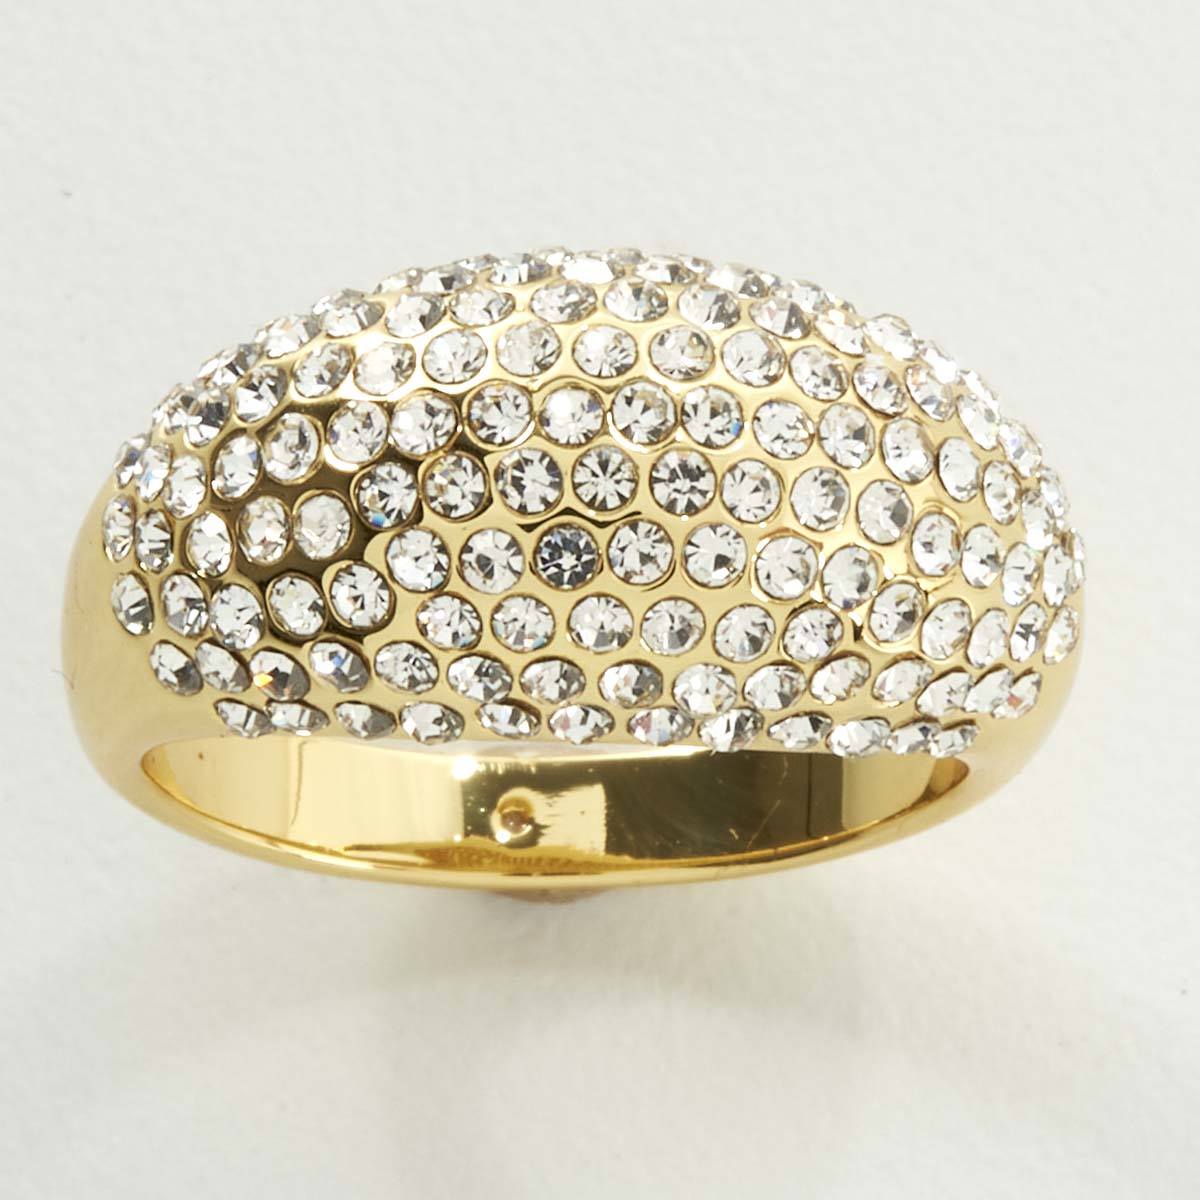 Ashley Cooper(tm) Gold Crystal Pave Dome Band Ring